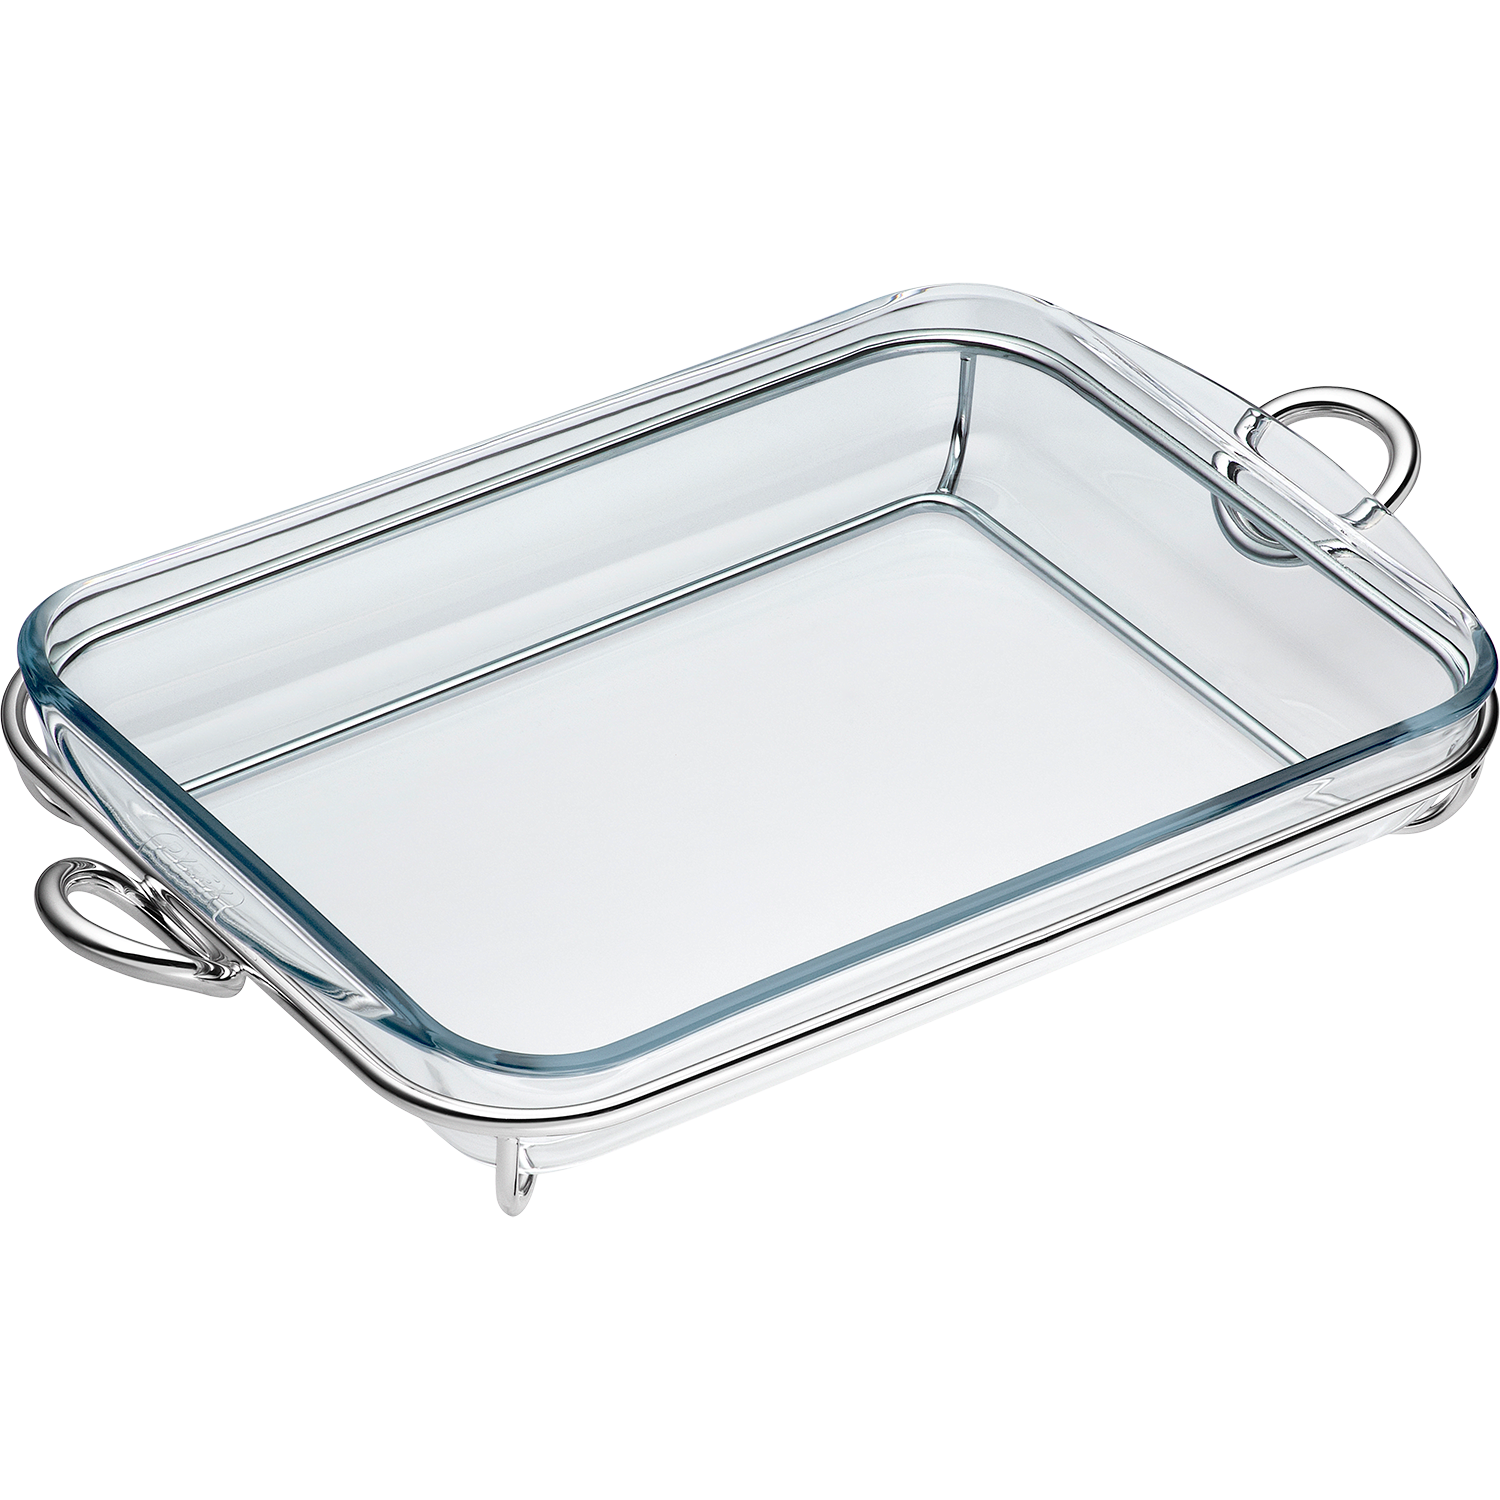 Silver-Plated & glass baking dish